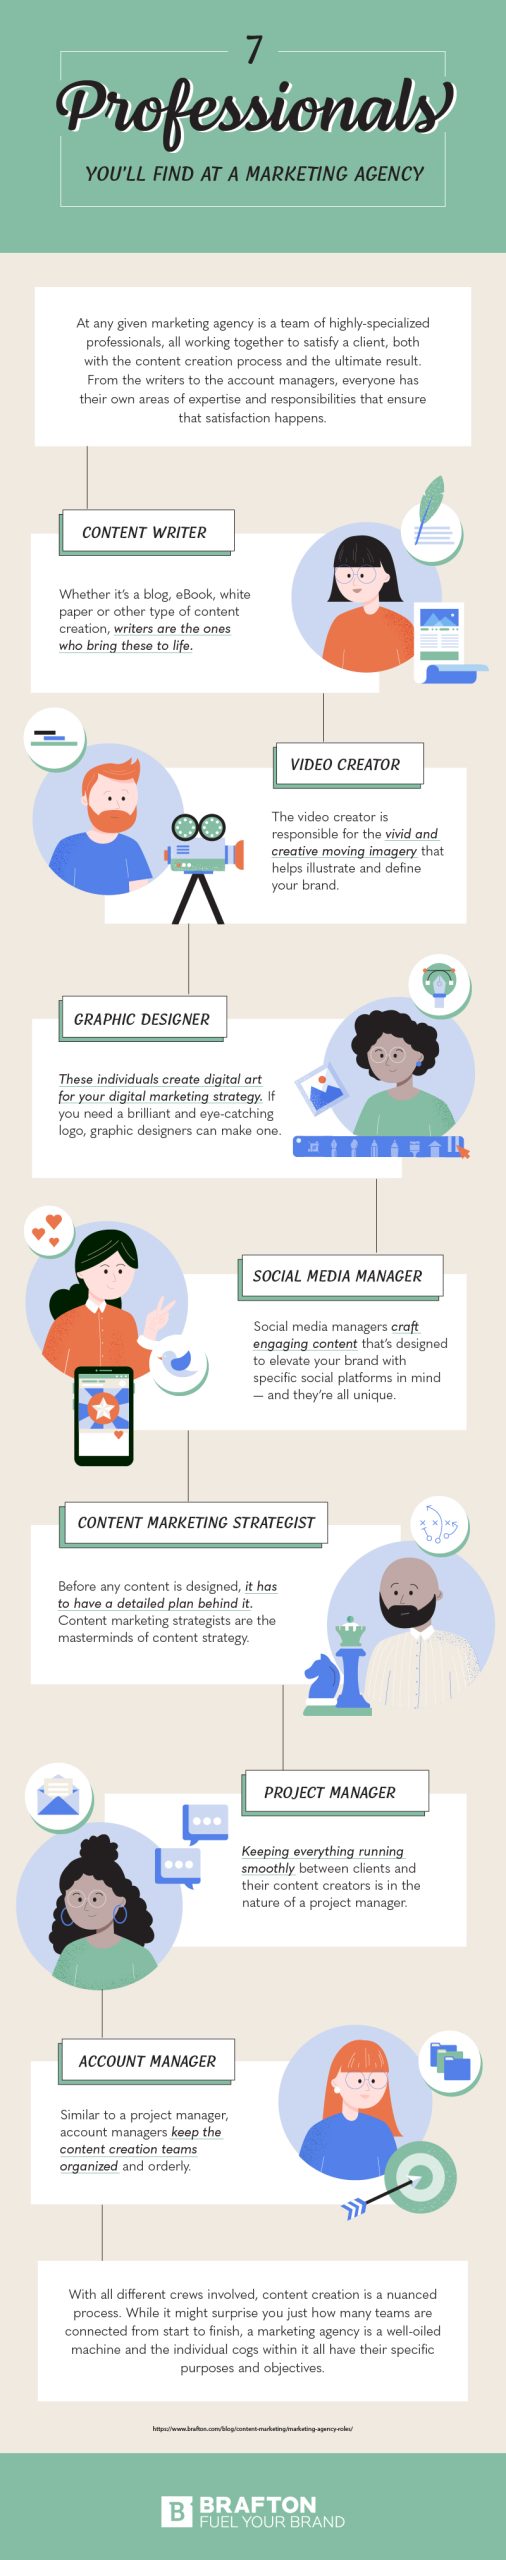 Marketing Agency Roles- A Behind-the-Scenes Look infographic